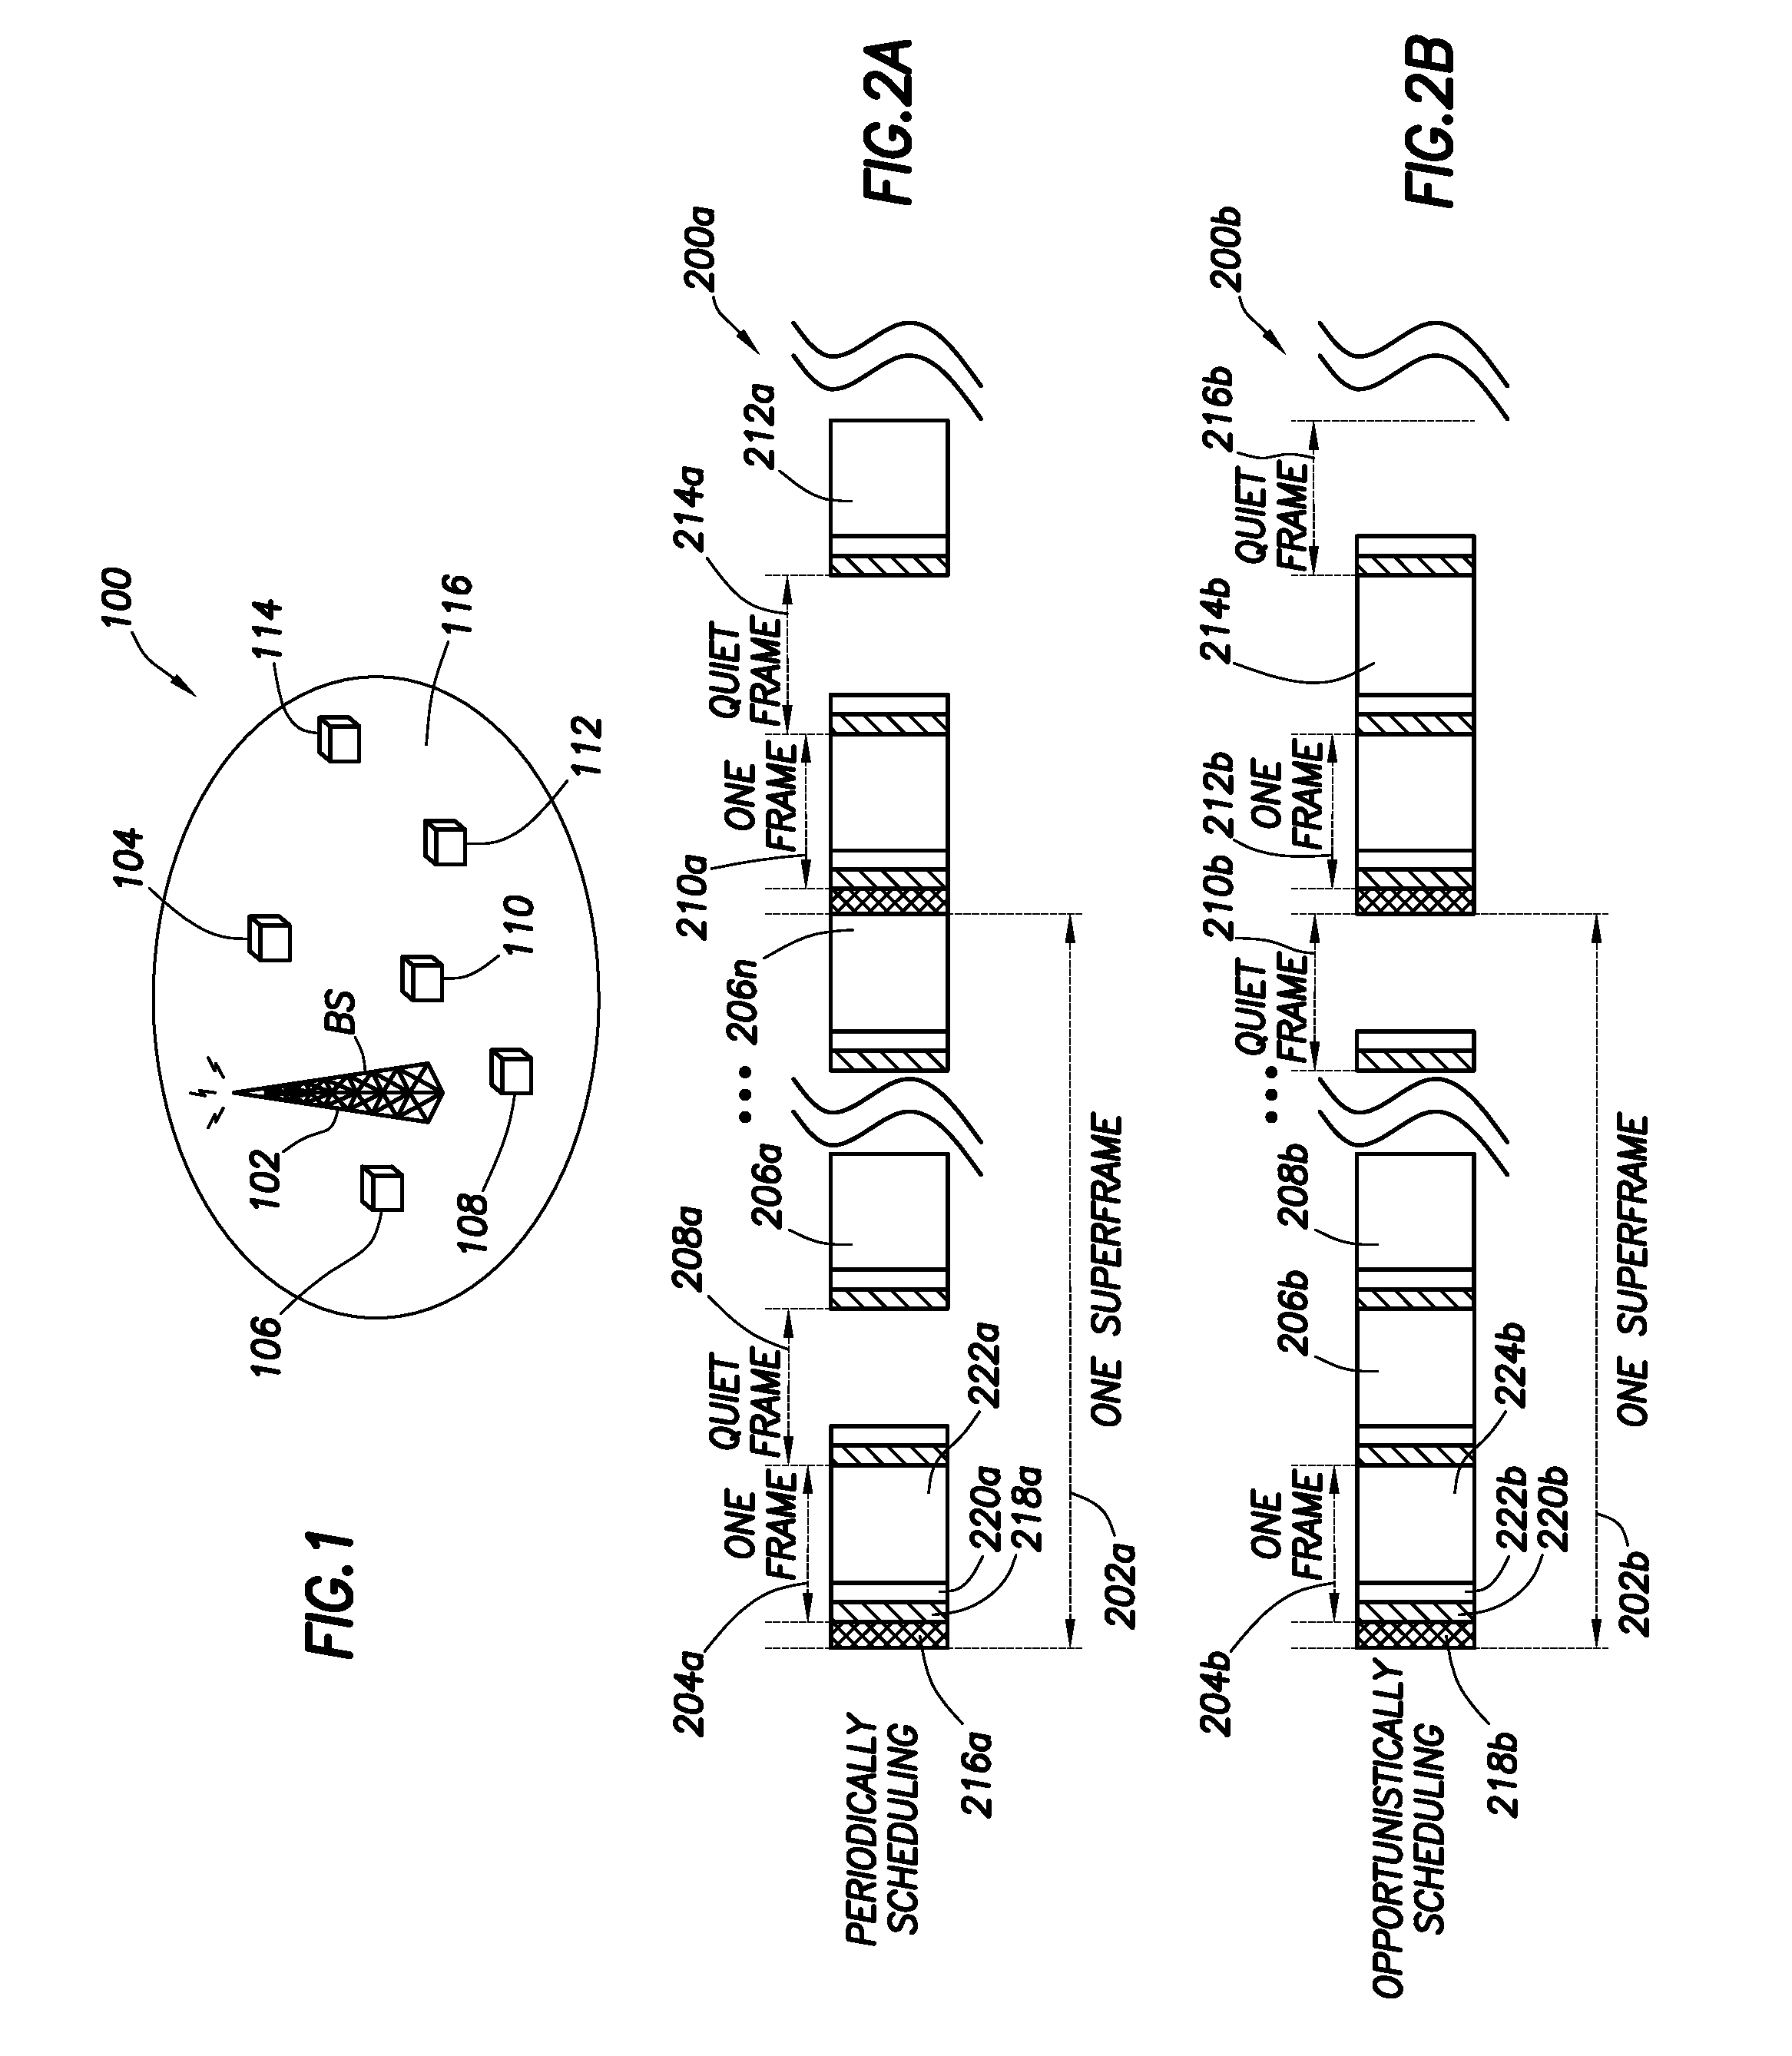 Method and system for improving frame synchronization, channel estimation and access in wireless communication networks